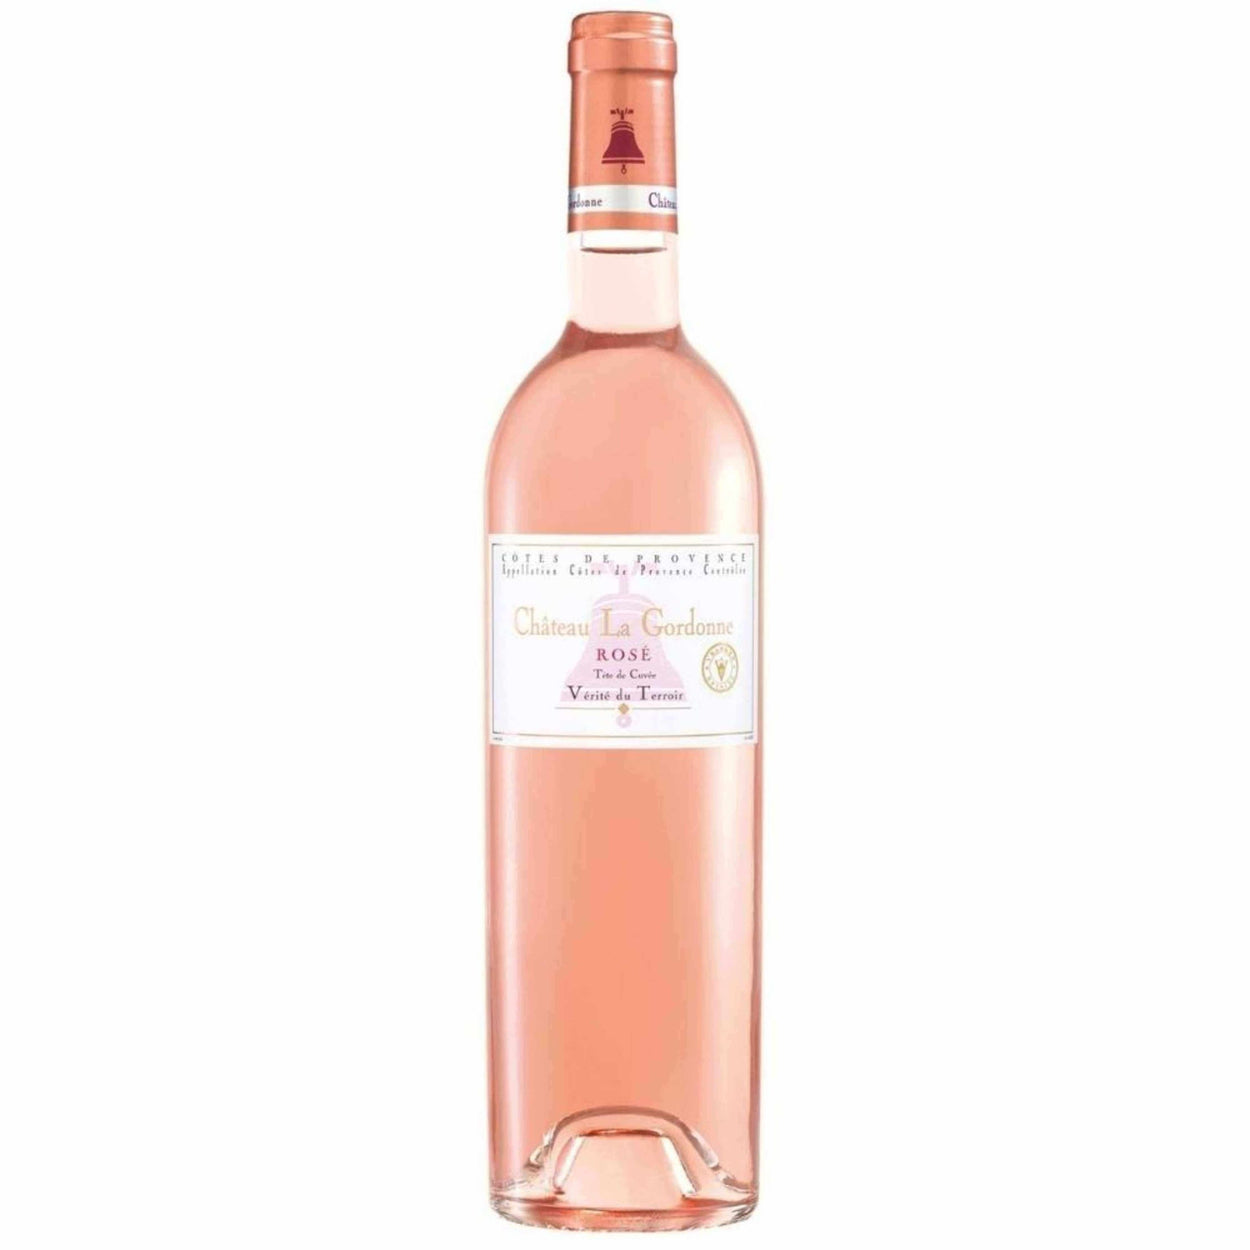 Chateau Galoupet Brand Overview & Buy Wine Same Day Delivery